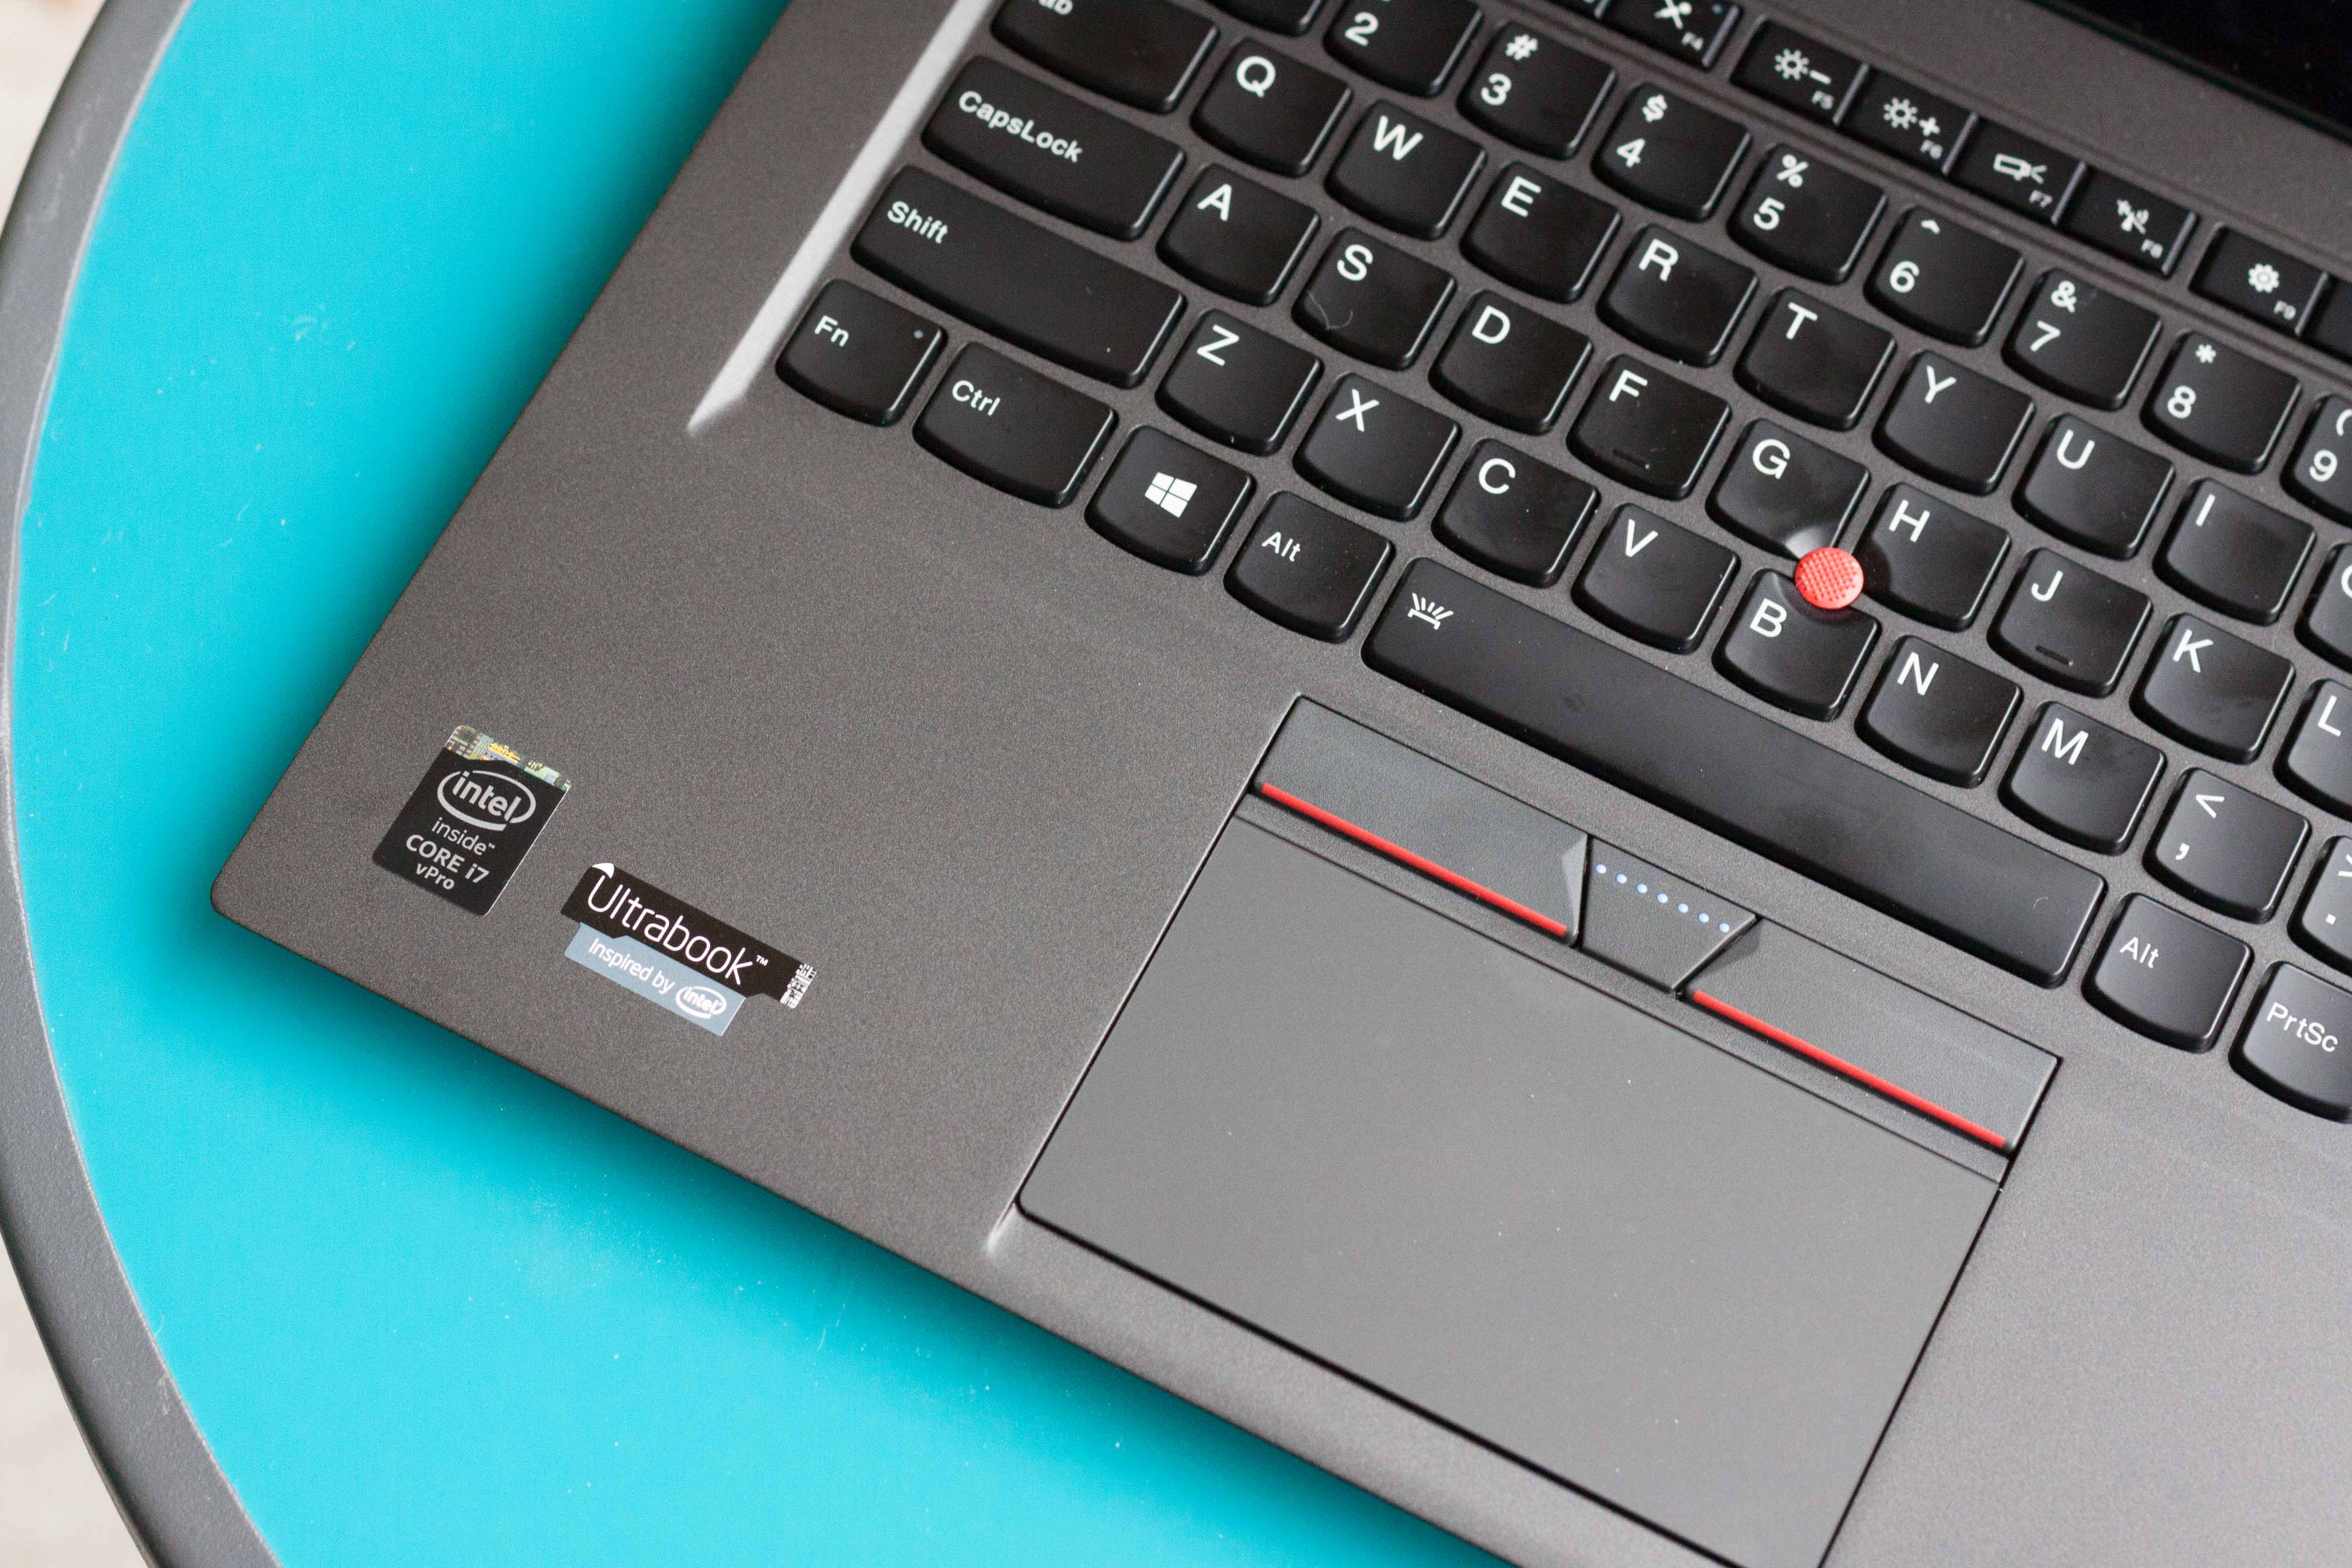 ThinkPad X1 Carbon review: A fine heir to the ThinkPad name | Ars 